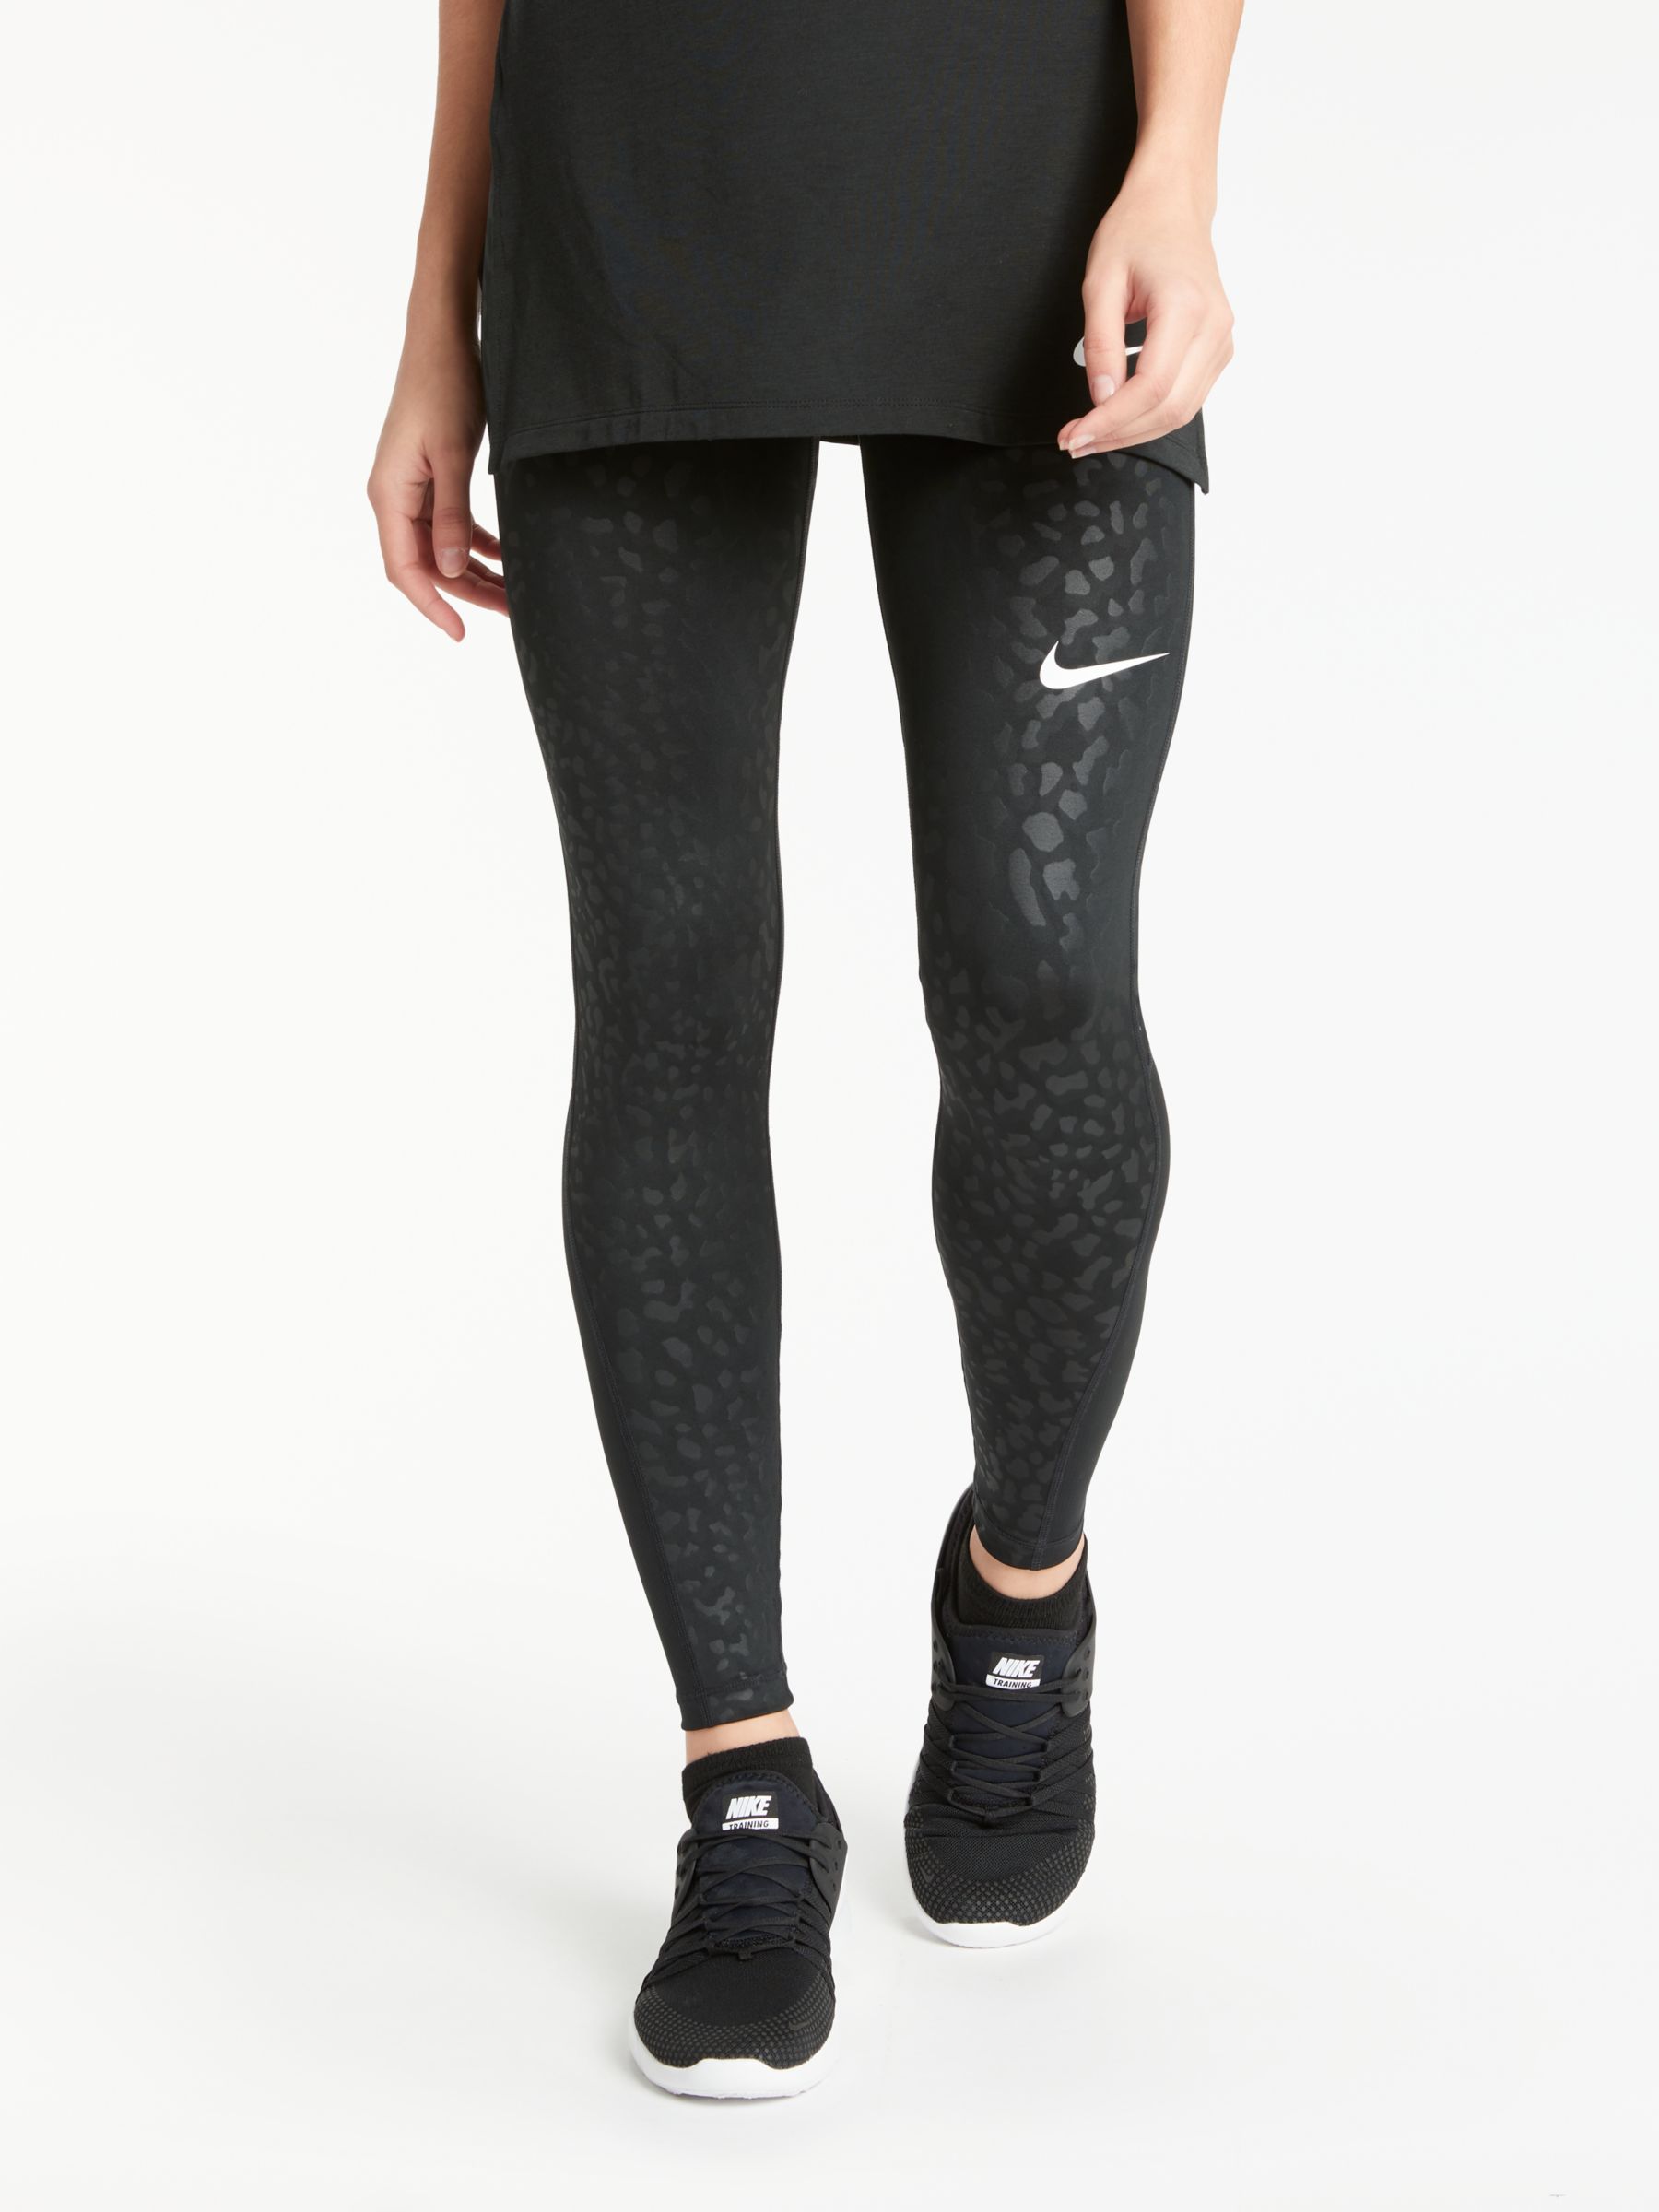 nike pro spotted cat tights